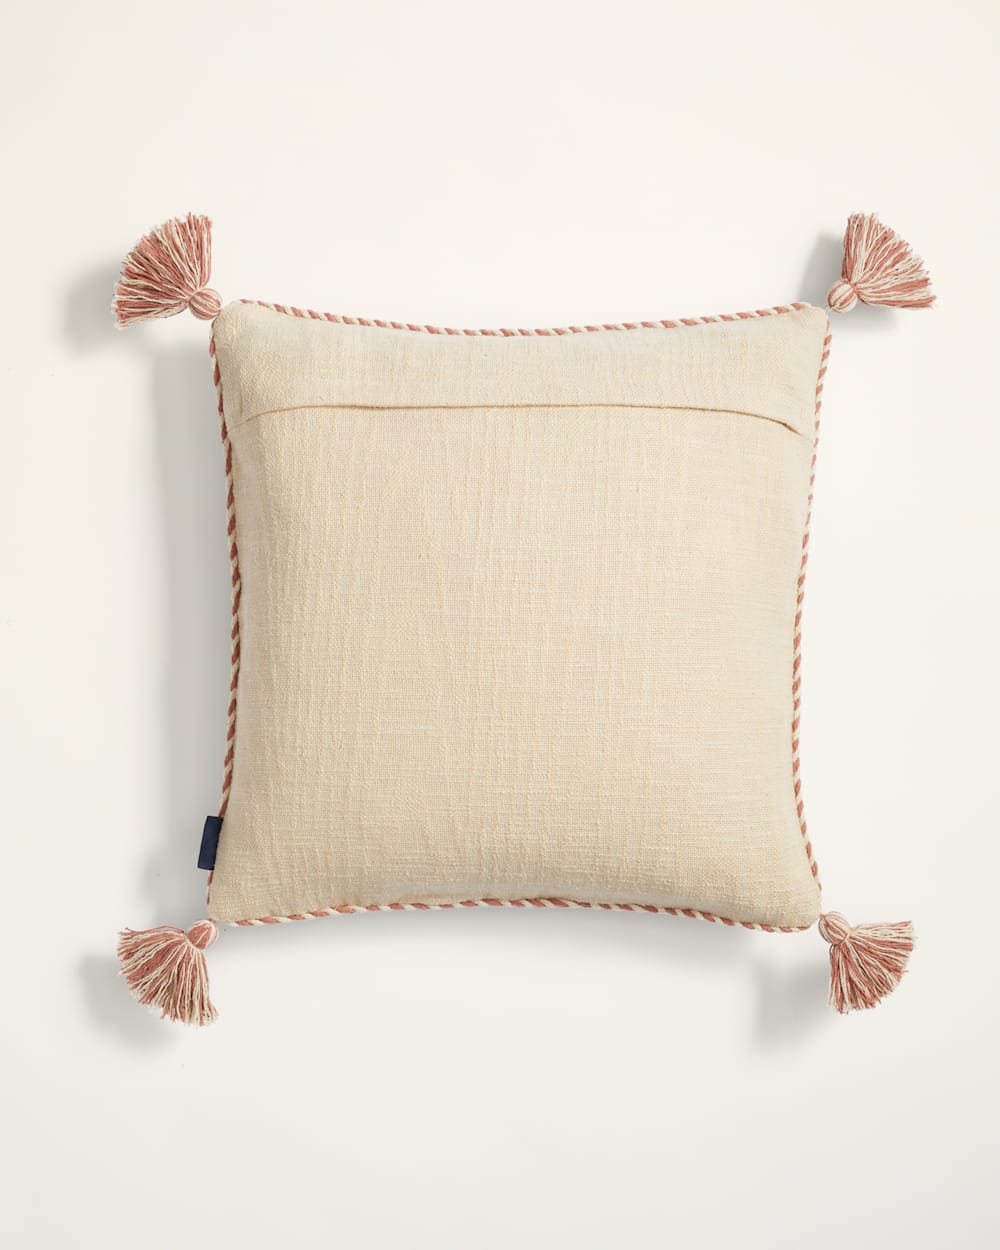 ALTERNATE VIEW OF OPAL SPRINGS EMBROIDERED SQUARE PILLOW IN TAN MULTI image number 3